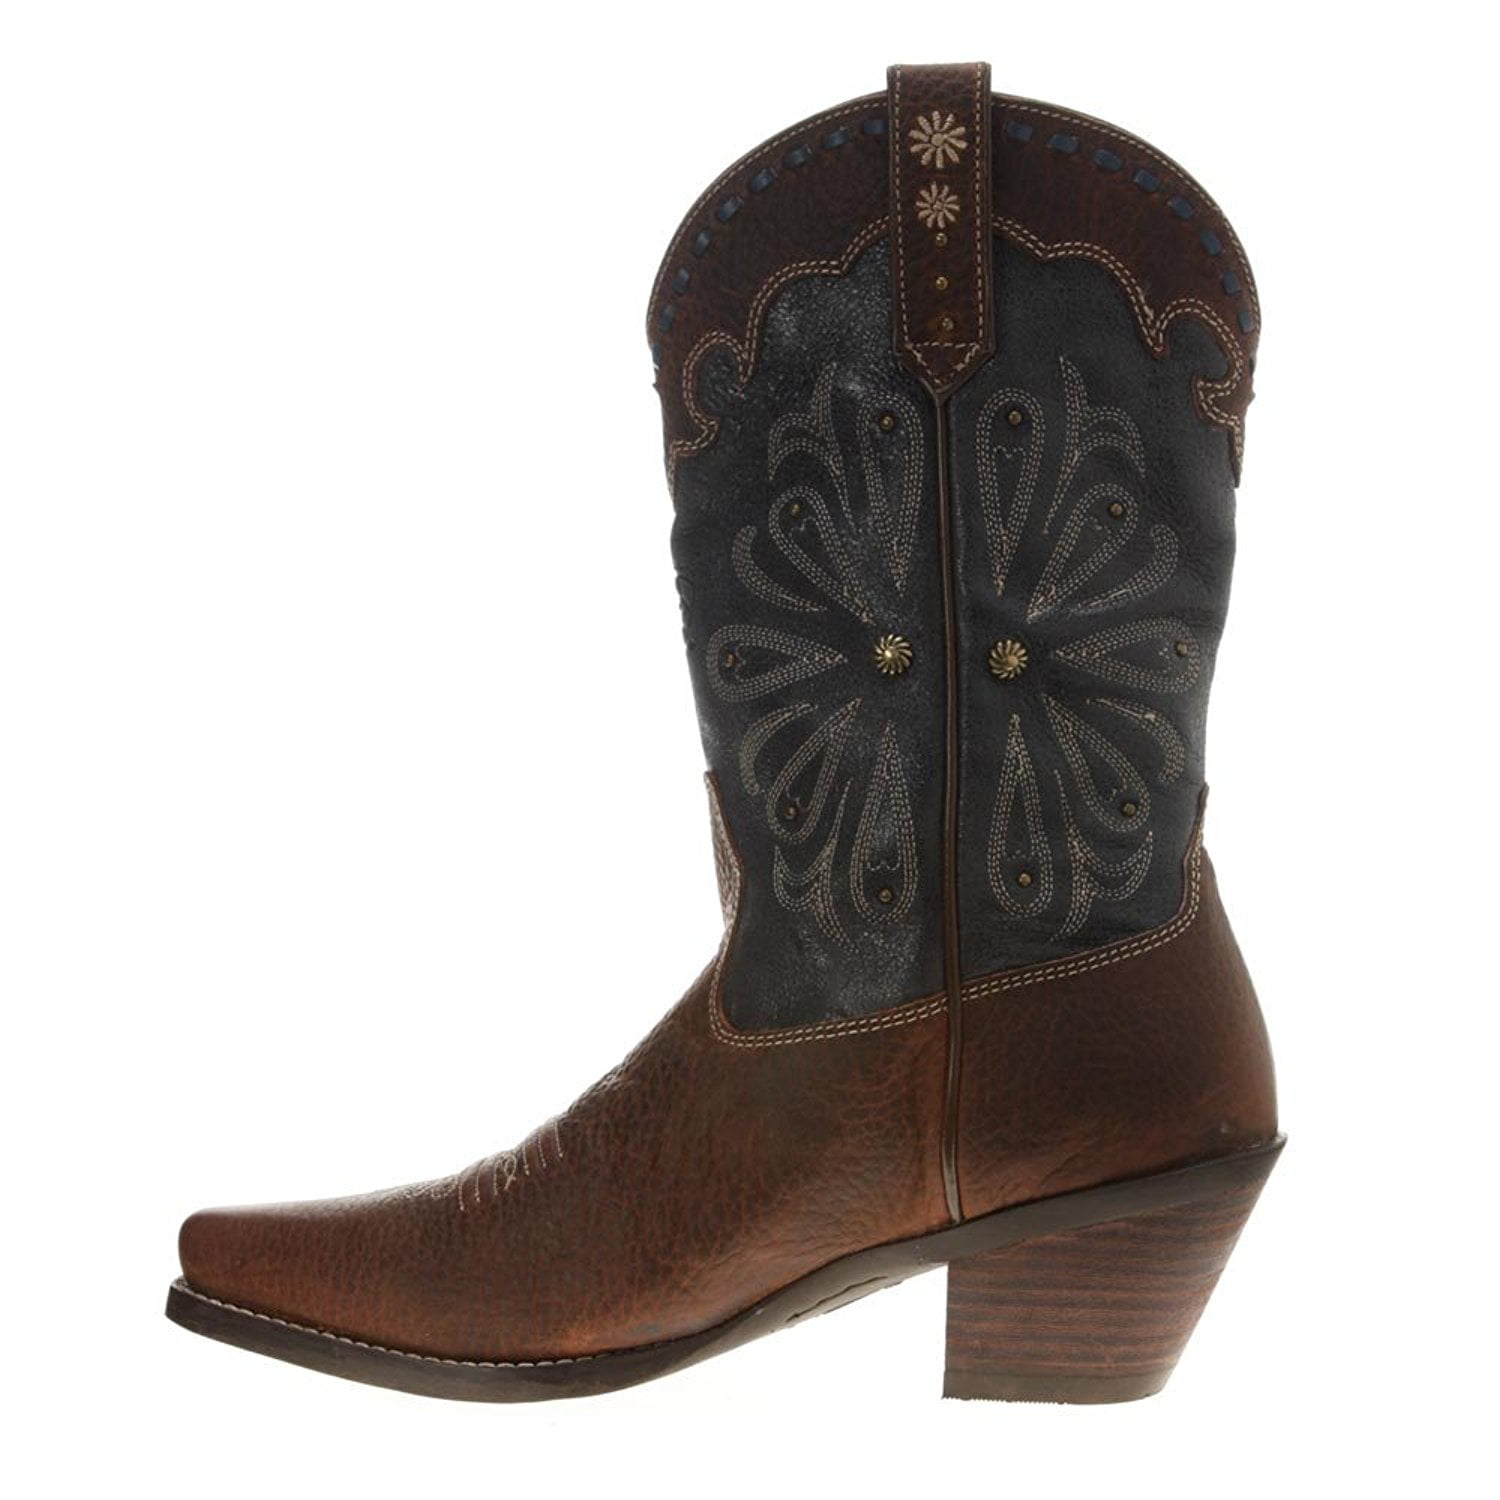 Ariat Women's Daisy Western Boots Brown Oiled Rowdy/Midnight Blue (6.0M)